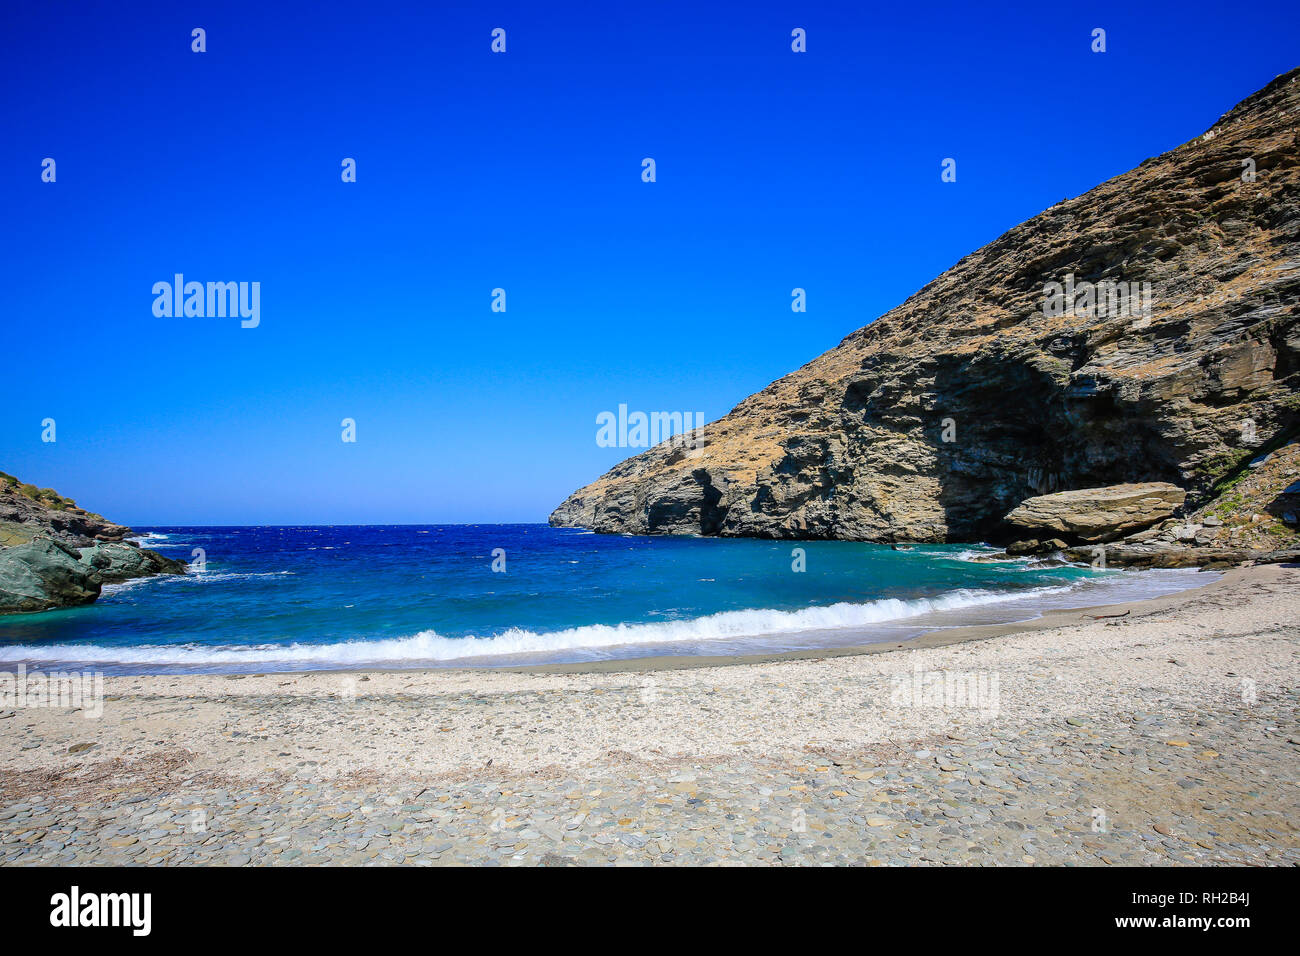 Island Andros, Cyclades, Greece - Beach Sineti in the southeast of the island.  Insel Andros, Kykladen, Griechenland - Strand Sineti im SŸdosten der I Stock Photo